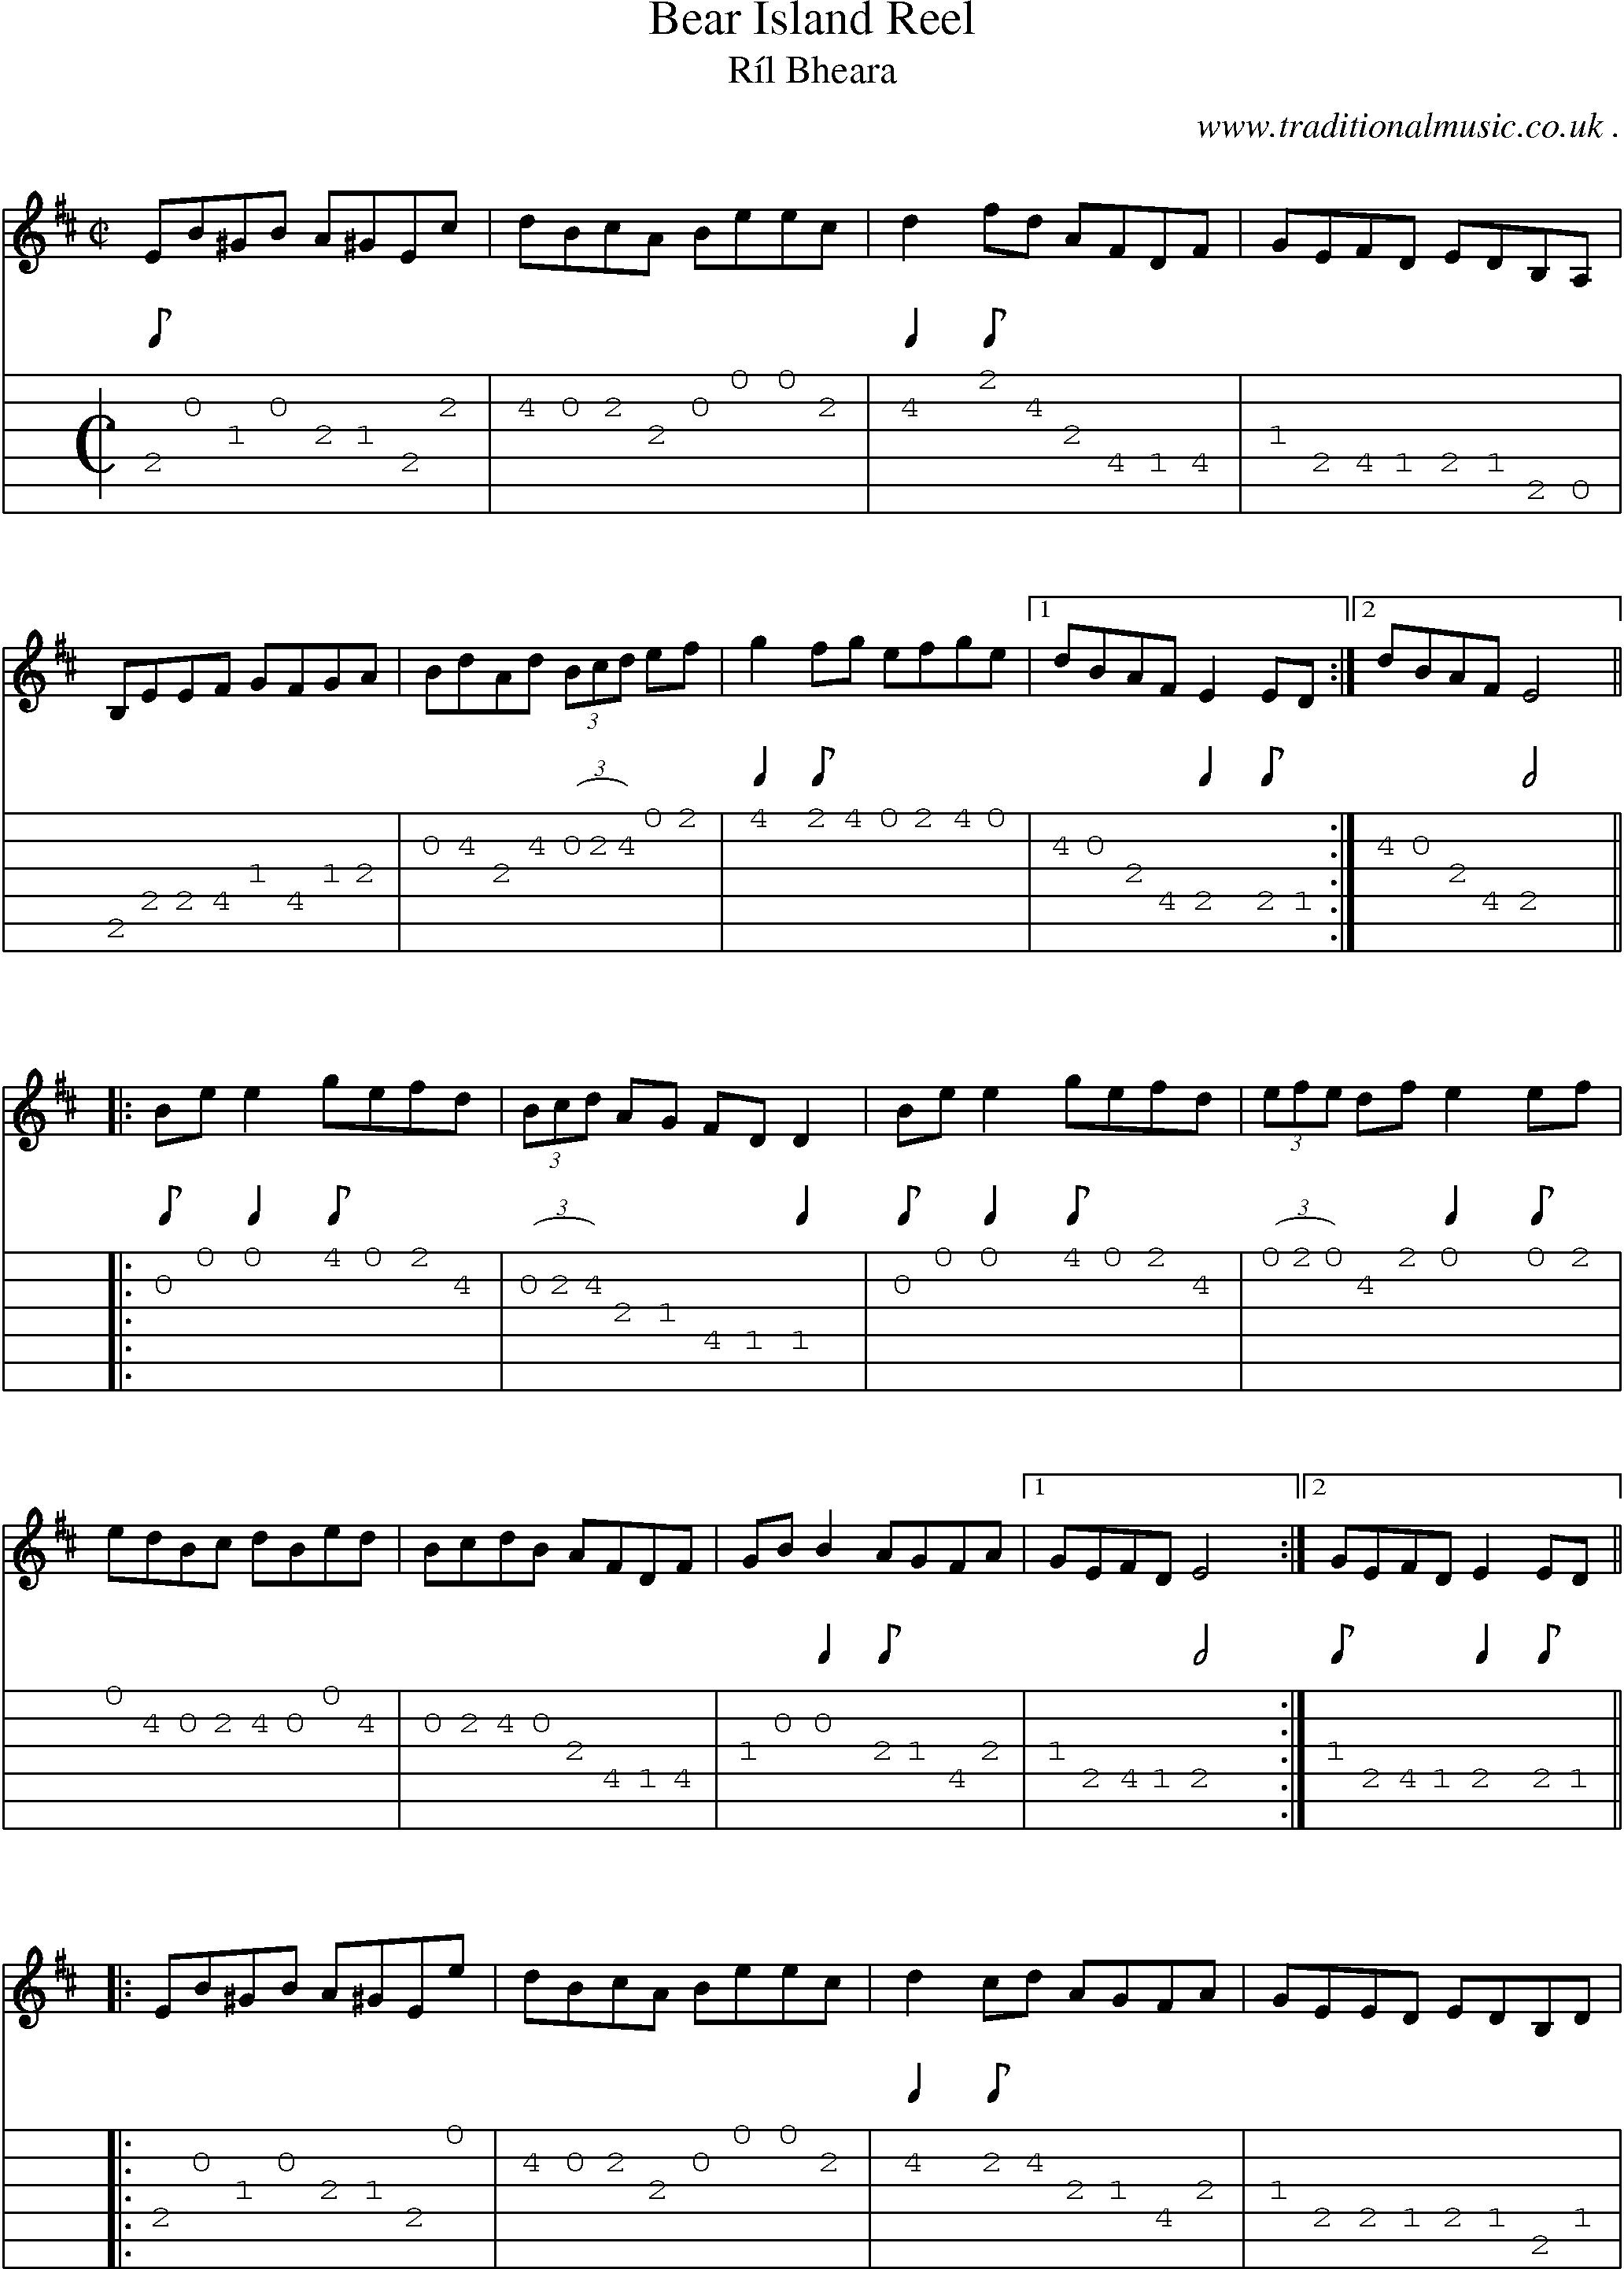 Sheet-Music and Guitar Tabs for Bear Island Reel